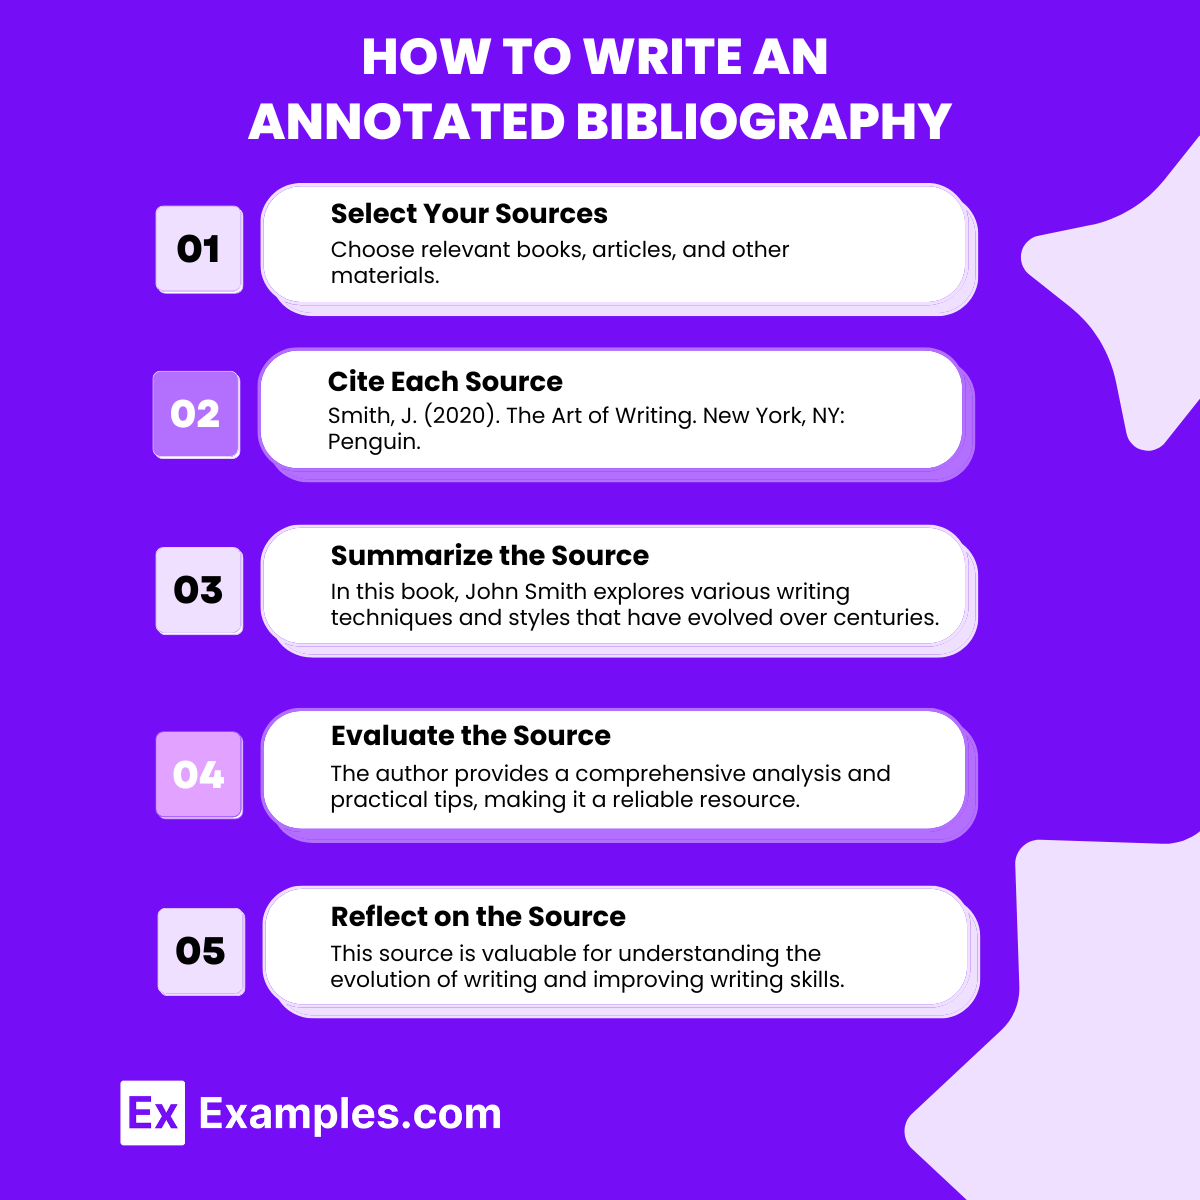 How to Write an Annotated Bibliography